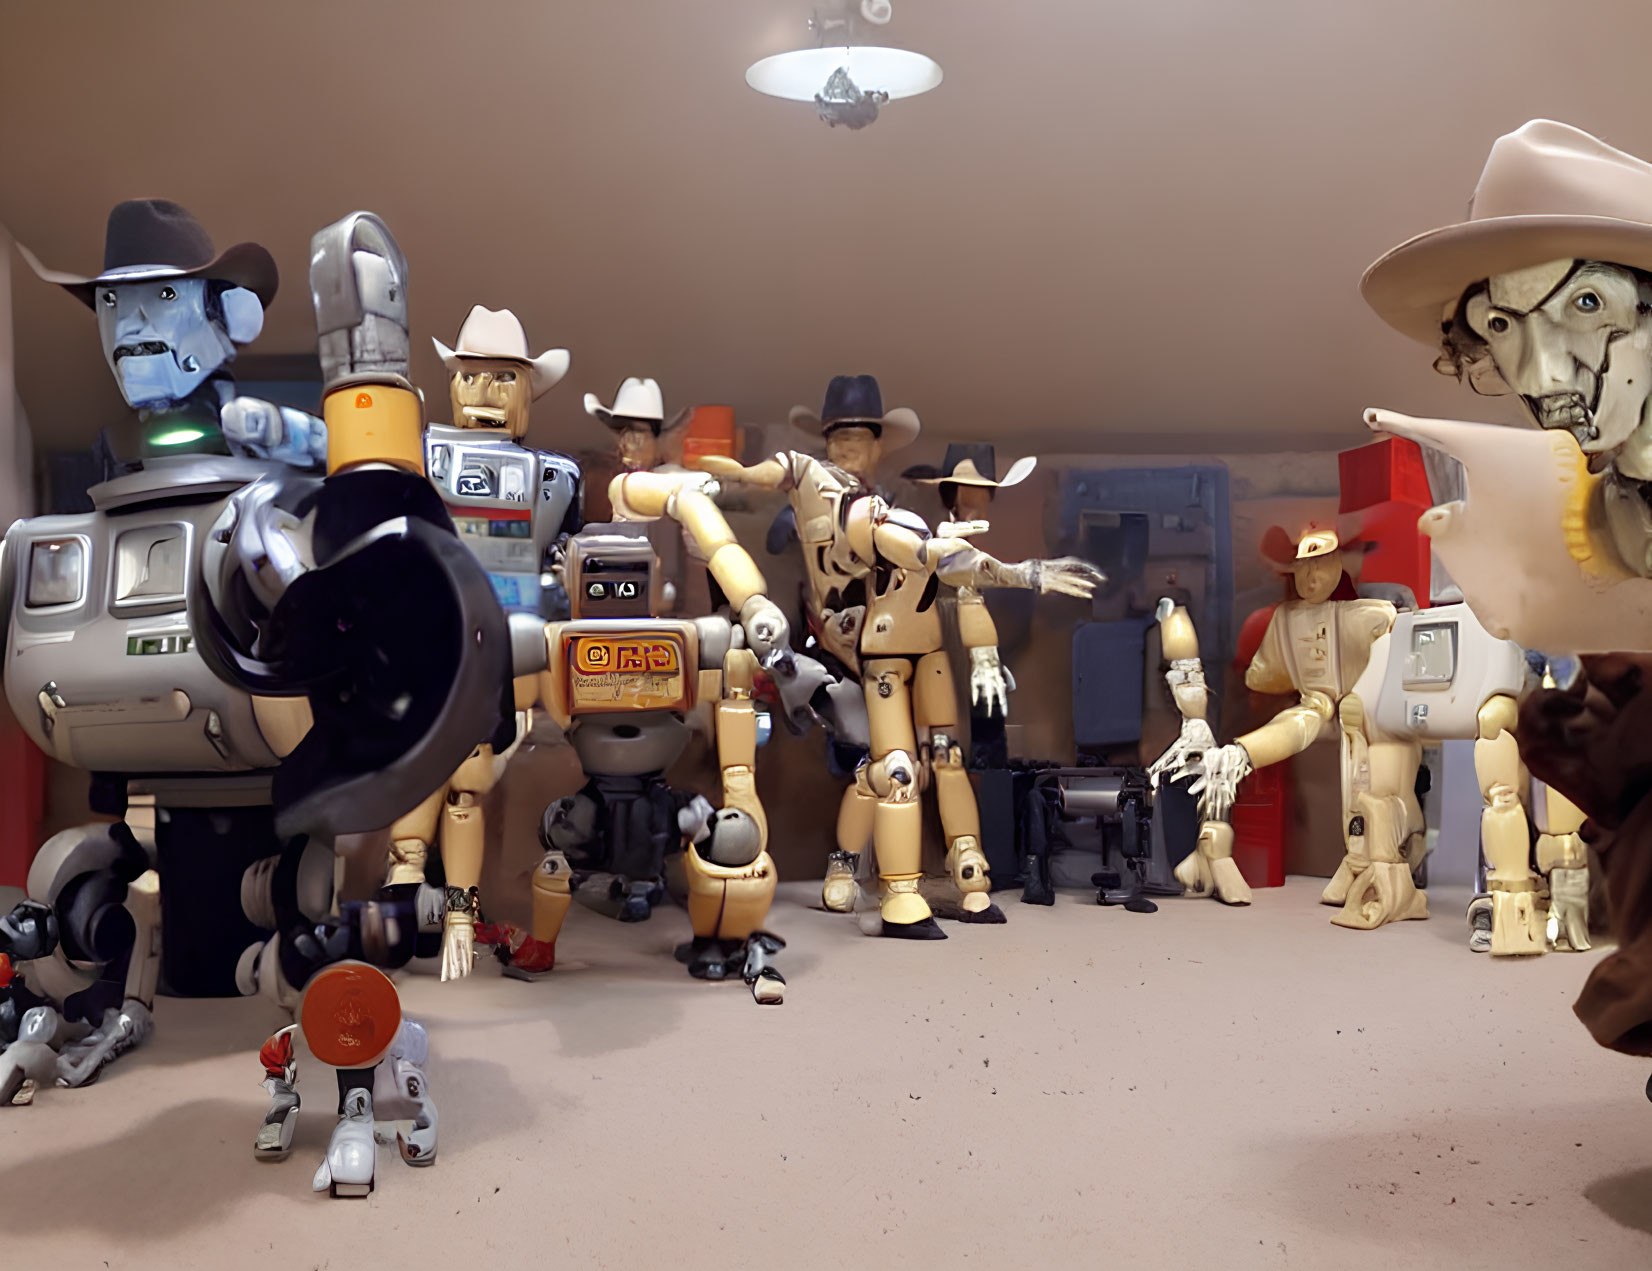 Western Cowboy Themed Robot Figurines with Mechanical Horses